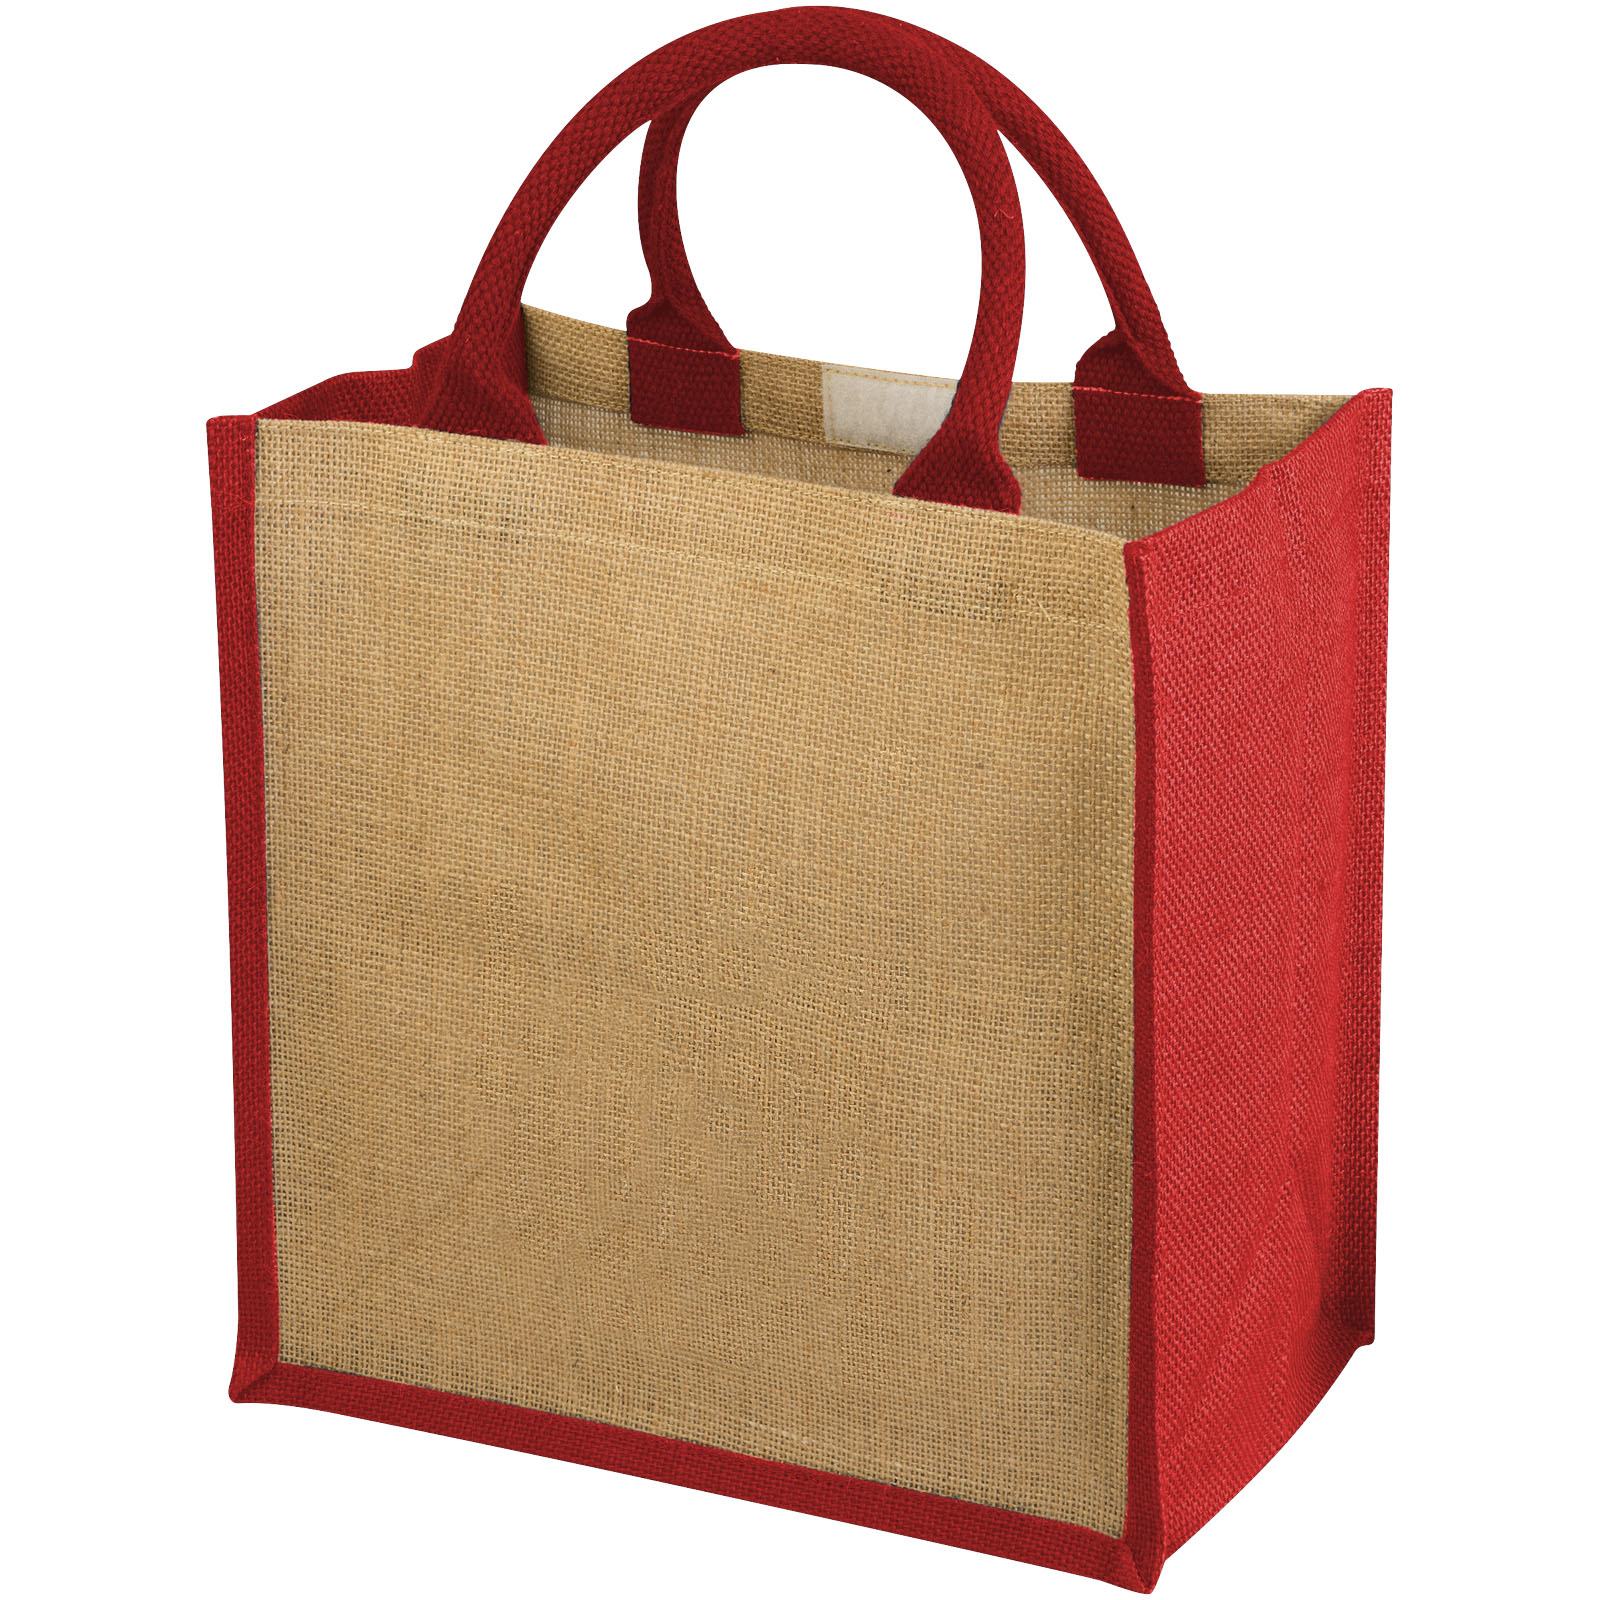 An image of a jute shopper with a red gusset